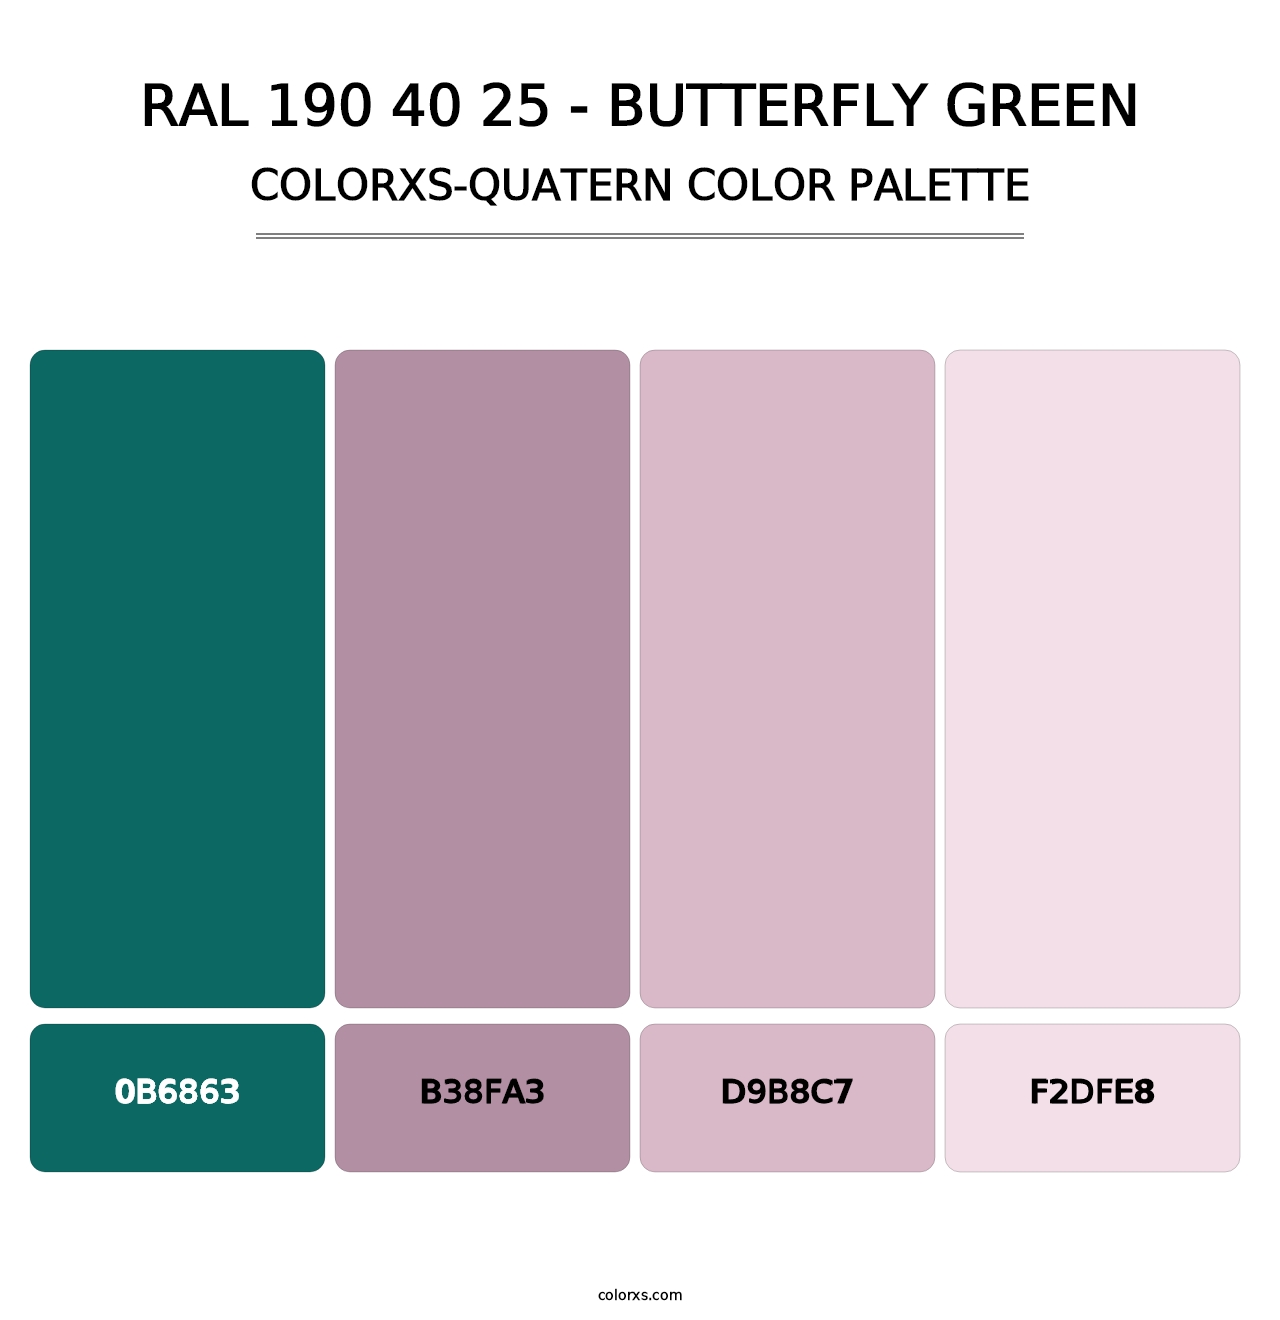 RAL 190 40 25 - Butterfly Green - Colorxs Quatern Palette